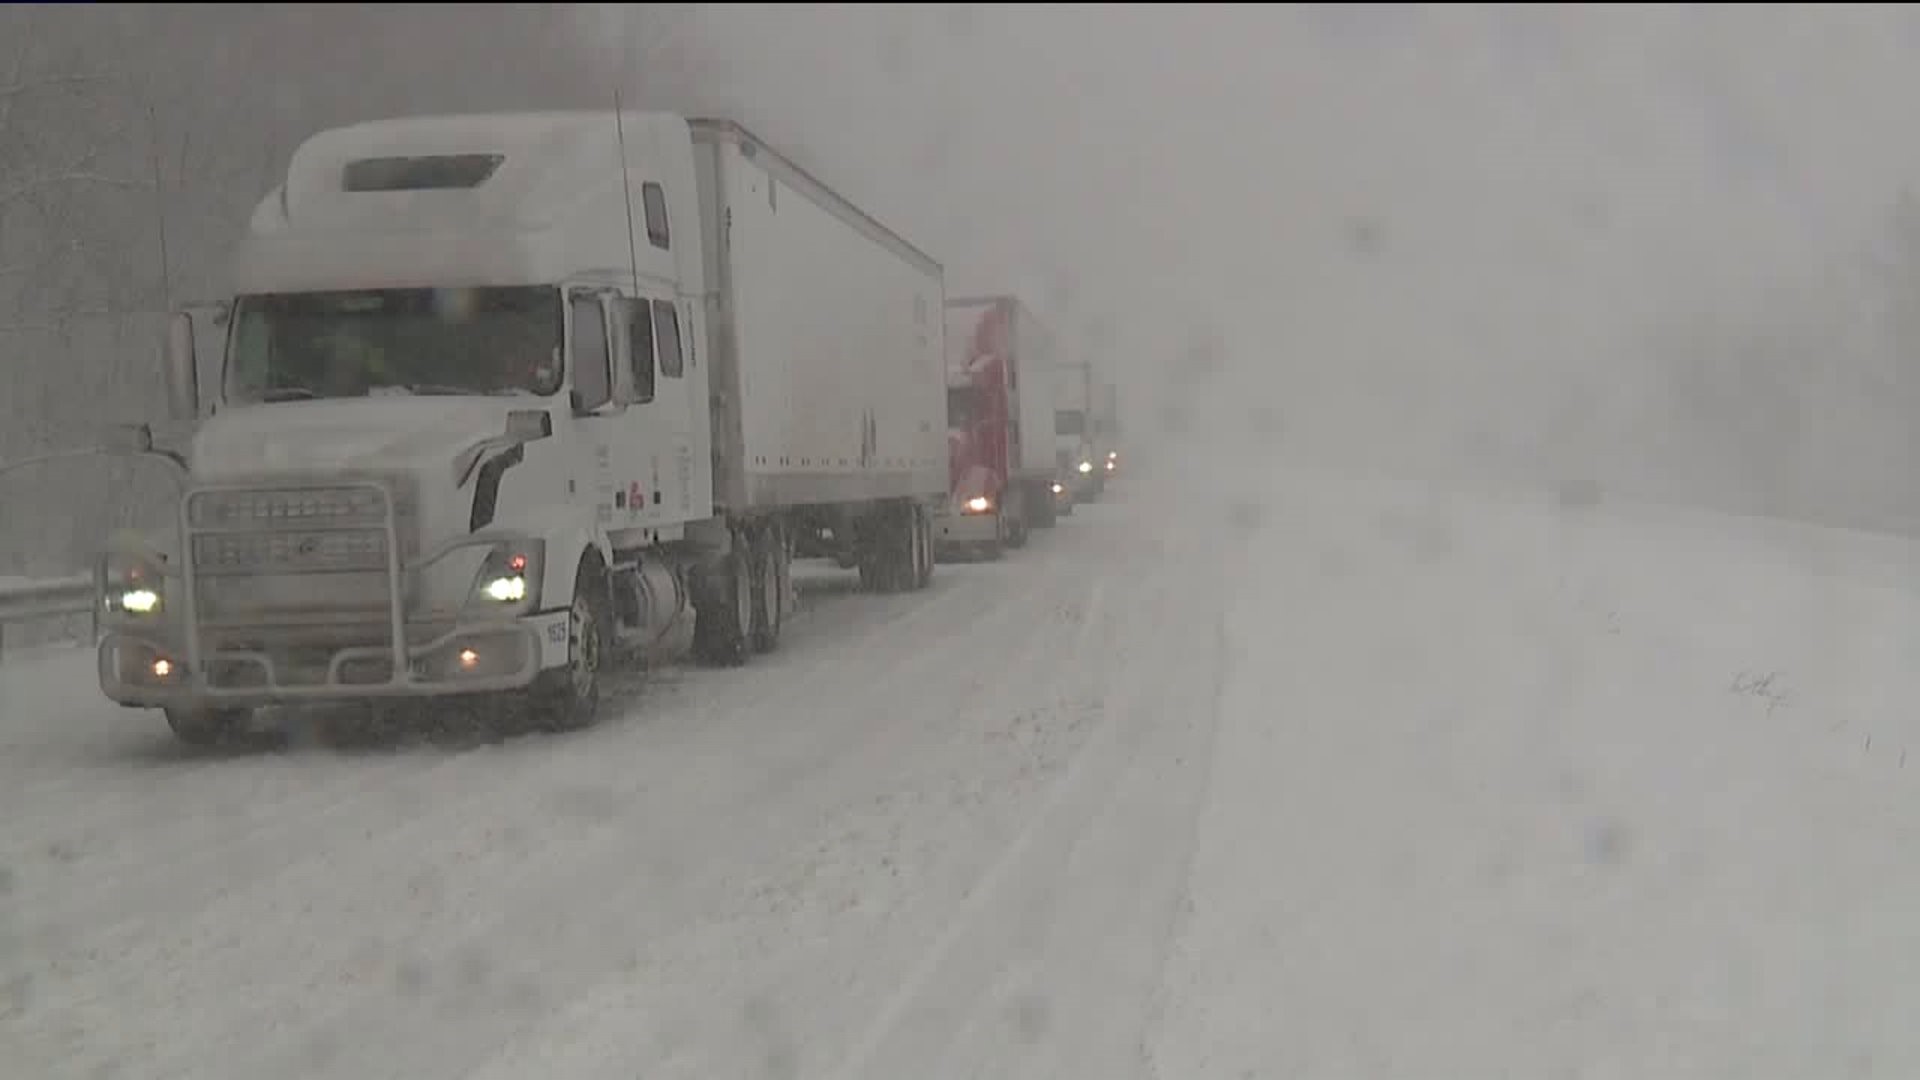 Snow Slows Traffic To A Crawl Along Interstate 81 In Susquehanna County